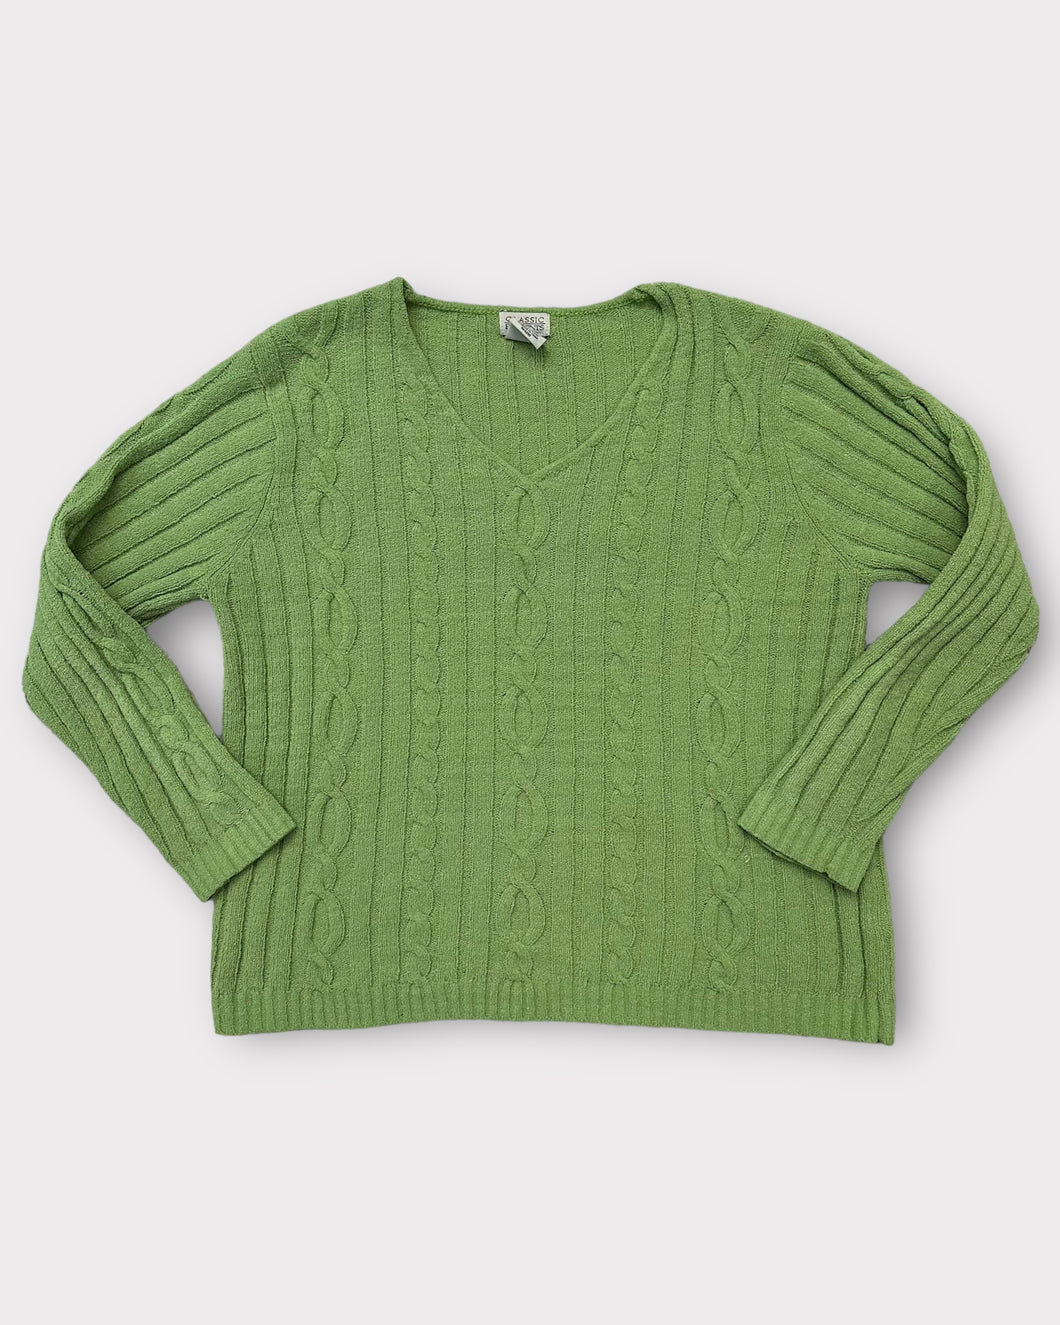 Classic Elements Lime Green Cable Knit V Neck Sweater (M)